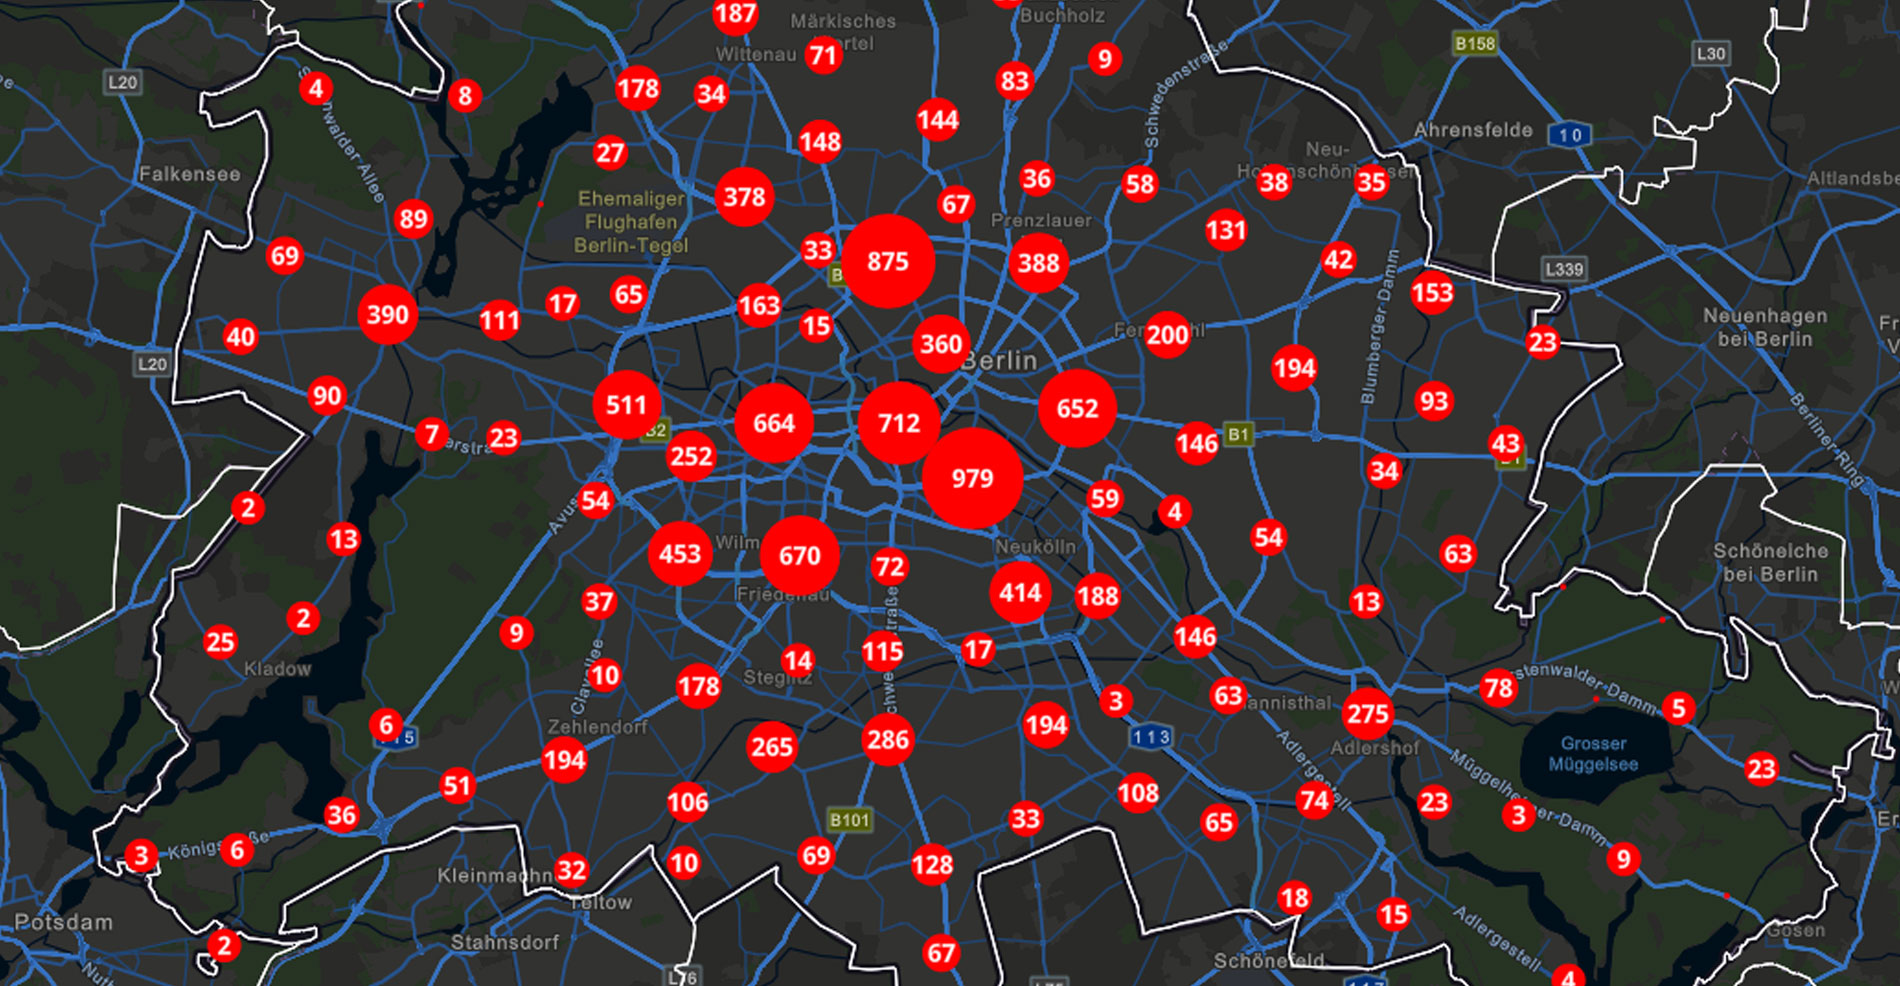 The image shows a map of Berlin, on which the number of traffic accidents is shown in clusters